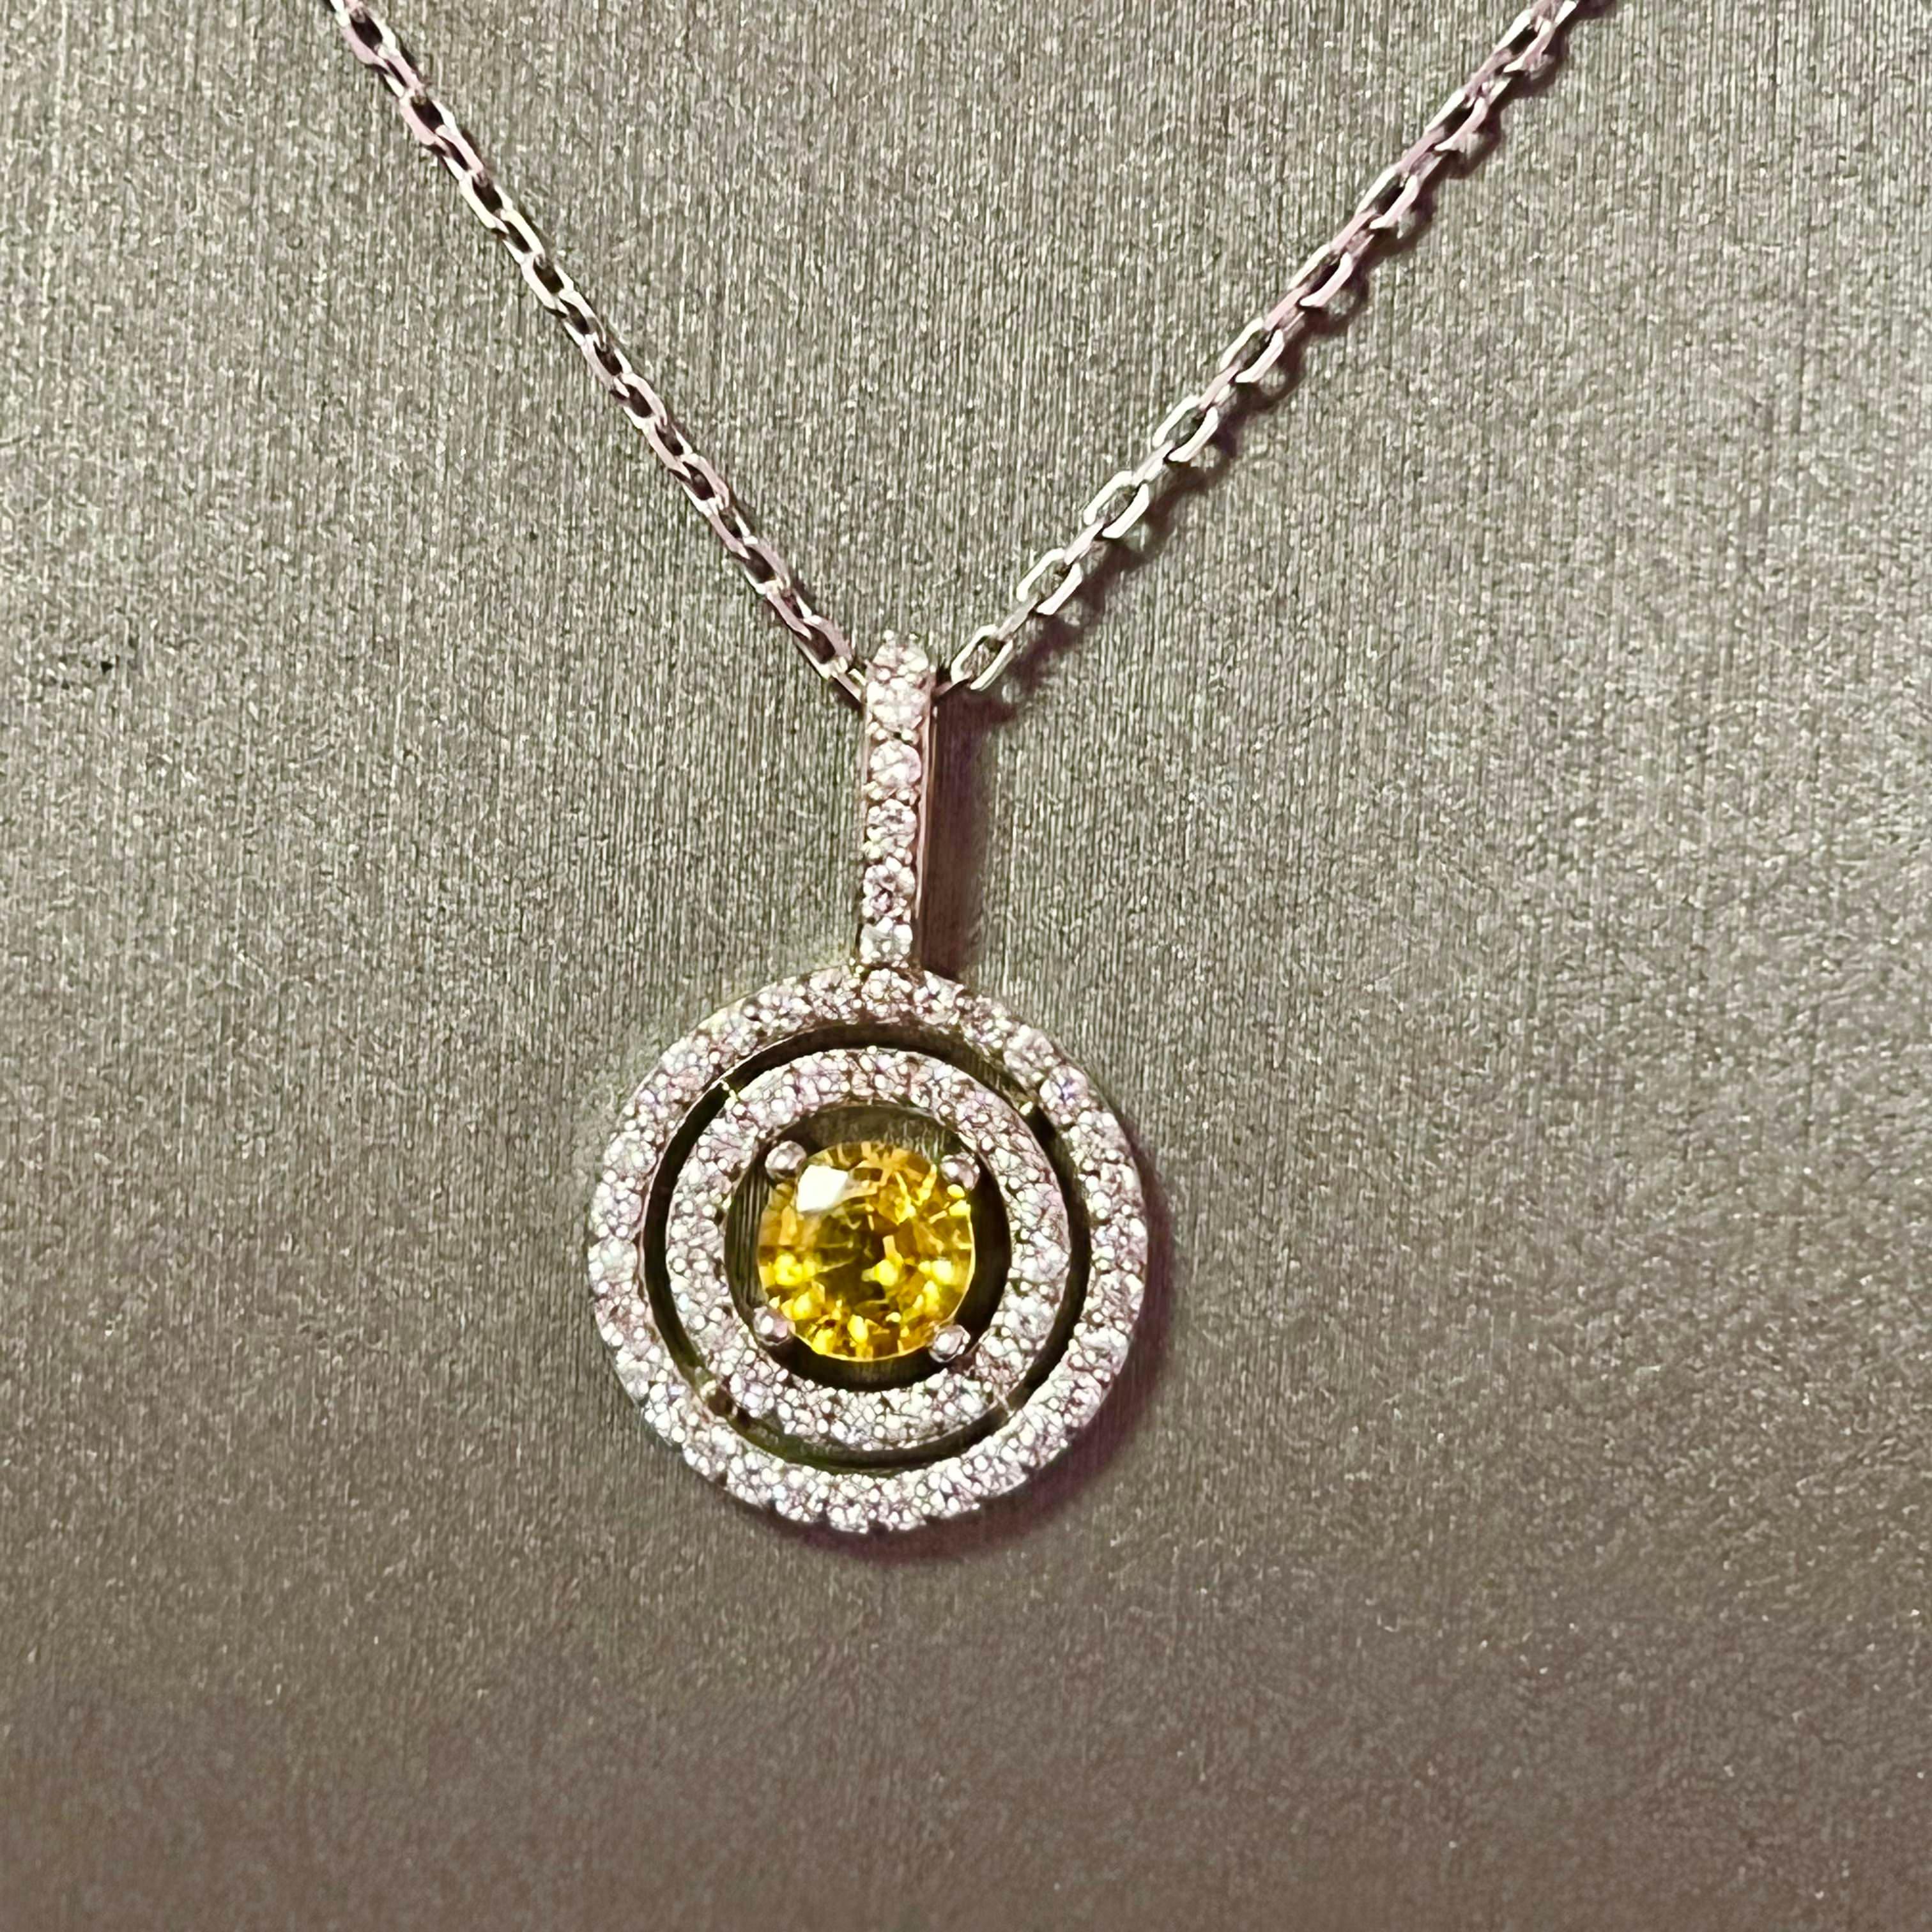 Natural Sapphire Diamond Necklace 14k Gold 1.51 TCW Certified For Sale 1